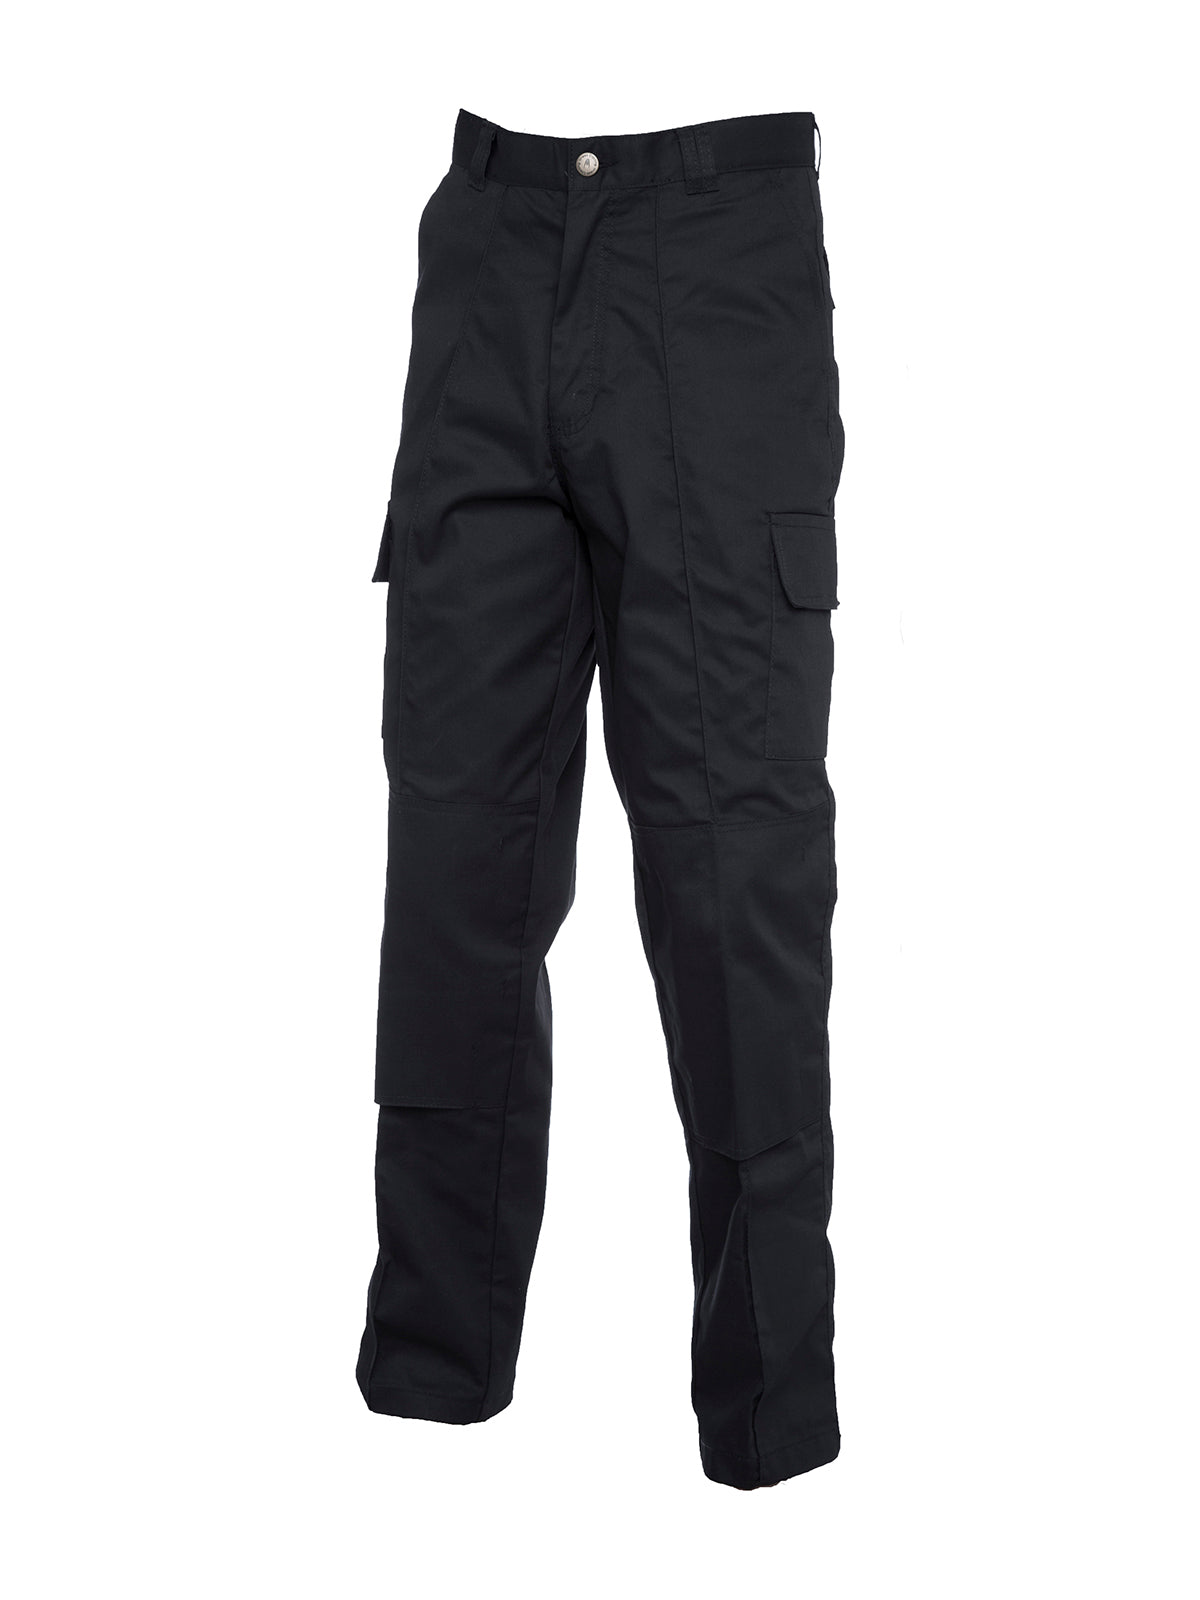 Cargo Trouser with Knee Pads - I Want Workwear